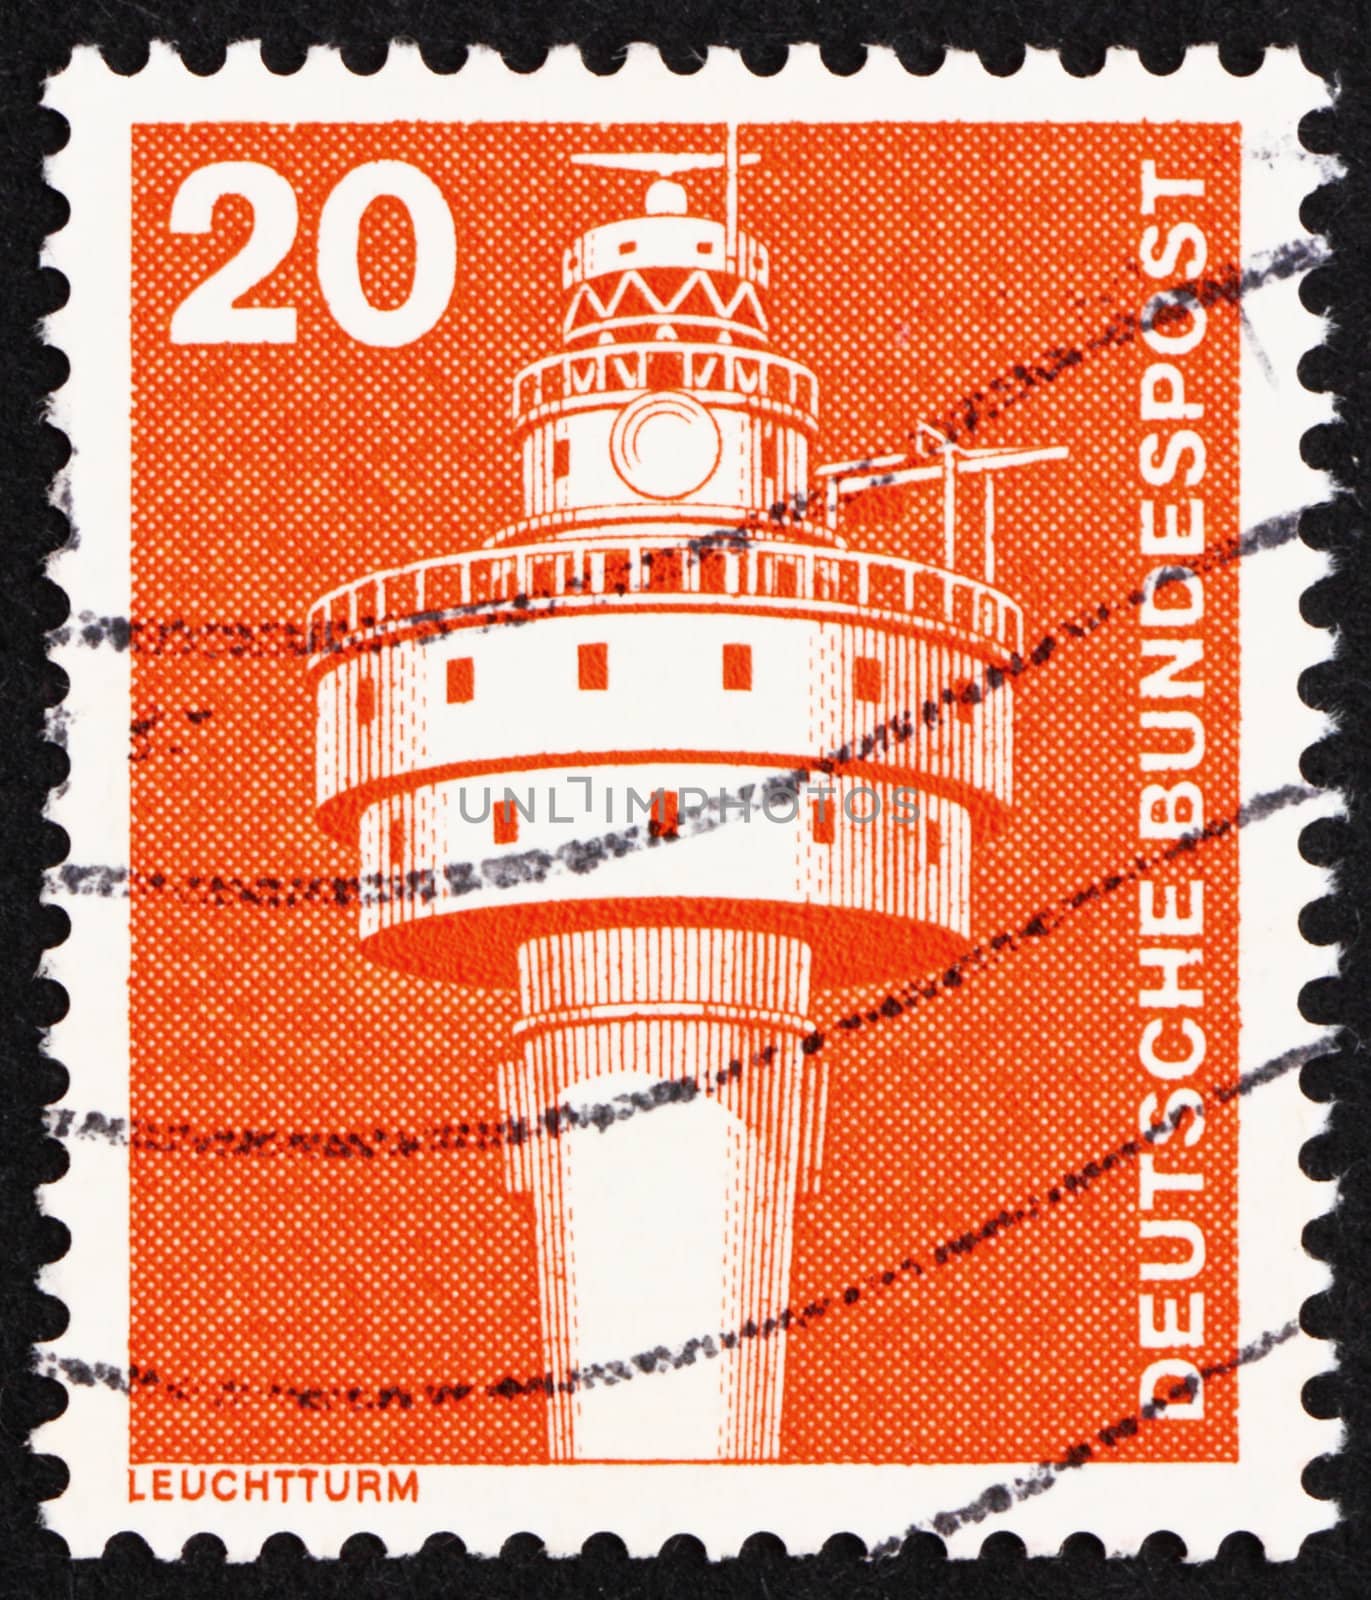 GERMANY - CIRCA 1976: a stamp printed in the Germany shows Old Weser Lighthouse, circa 1976